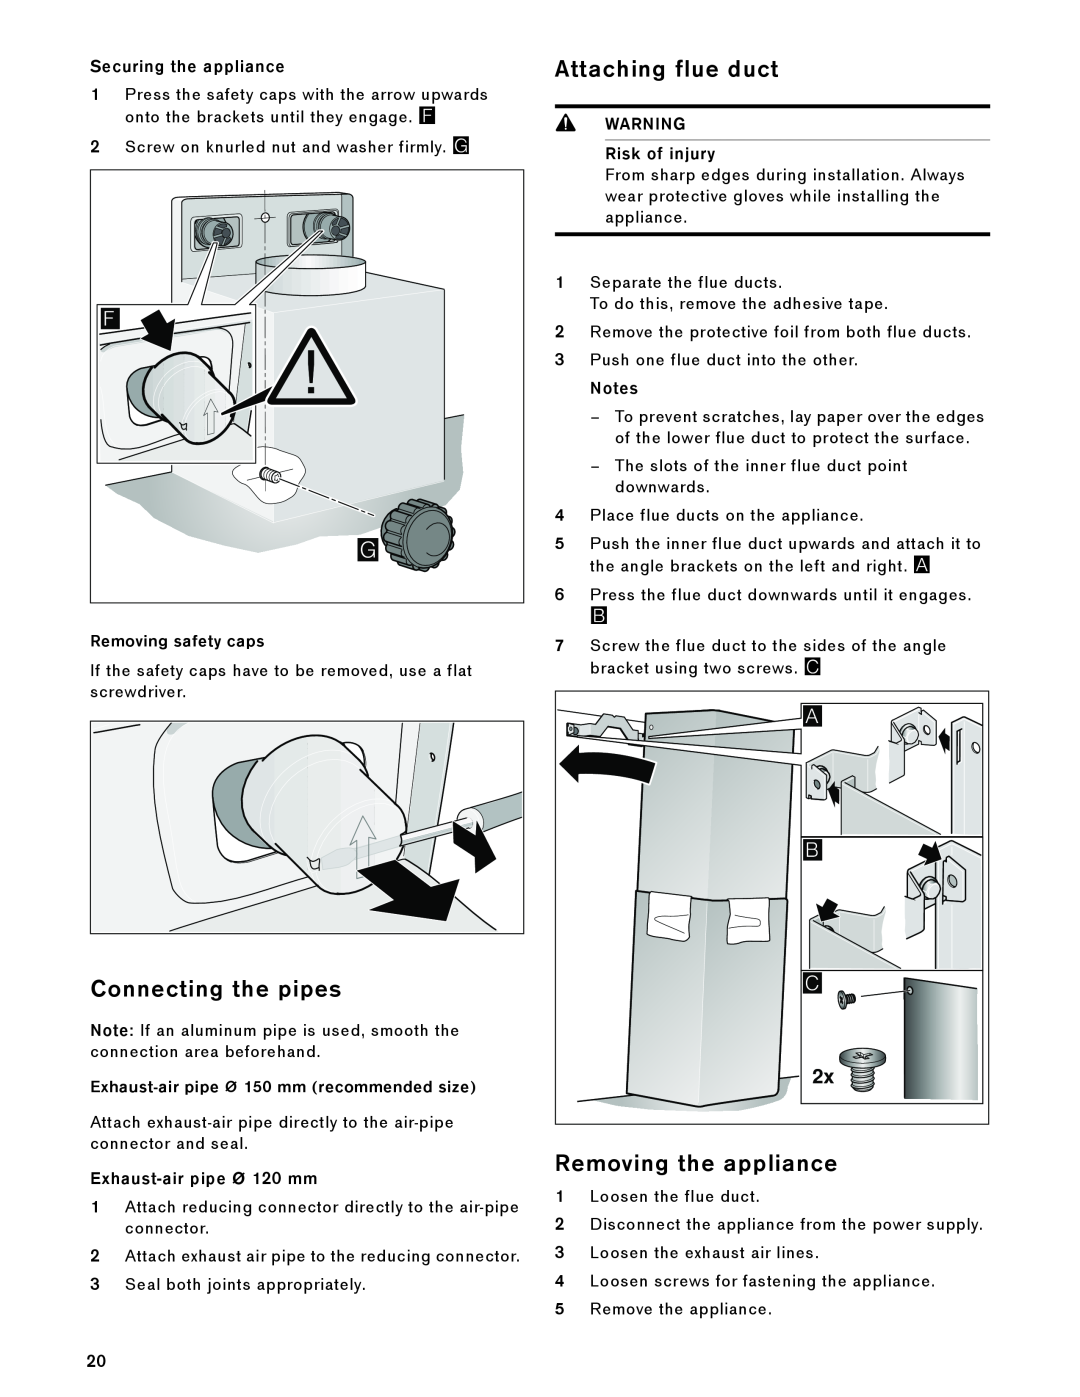 Gaggenau AW 230 790 manual Connecting the pipes, Attaching flue duct, Removing the appliance, Securing the appliance 